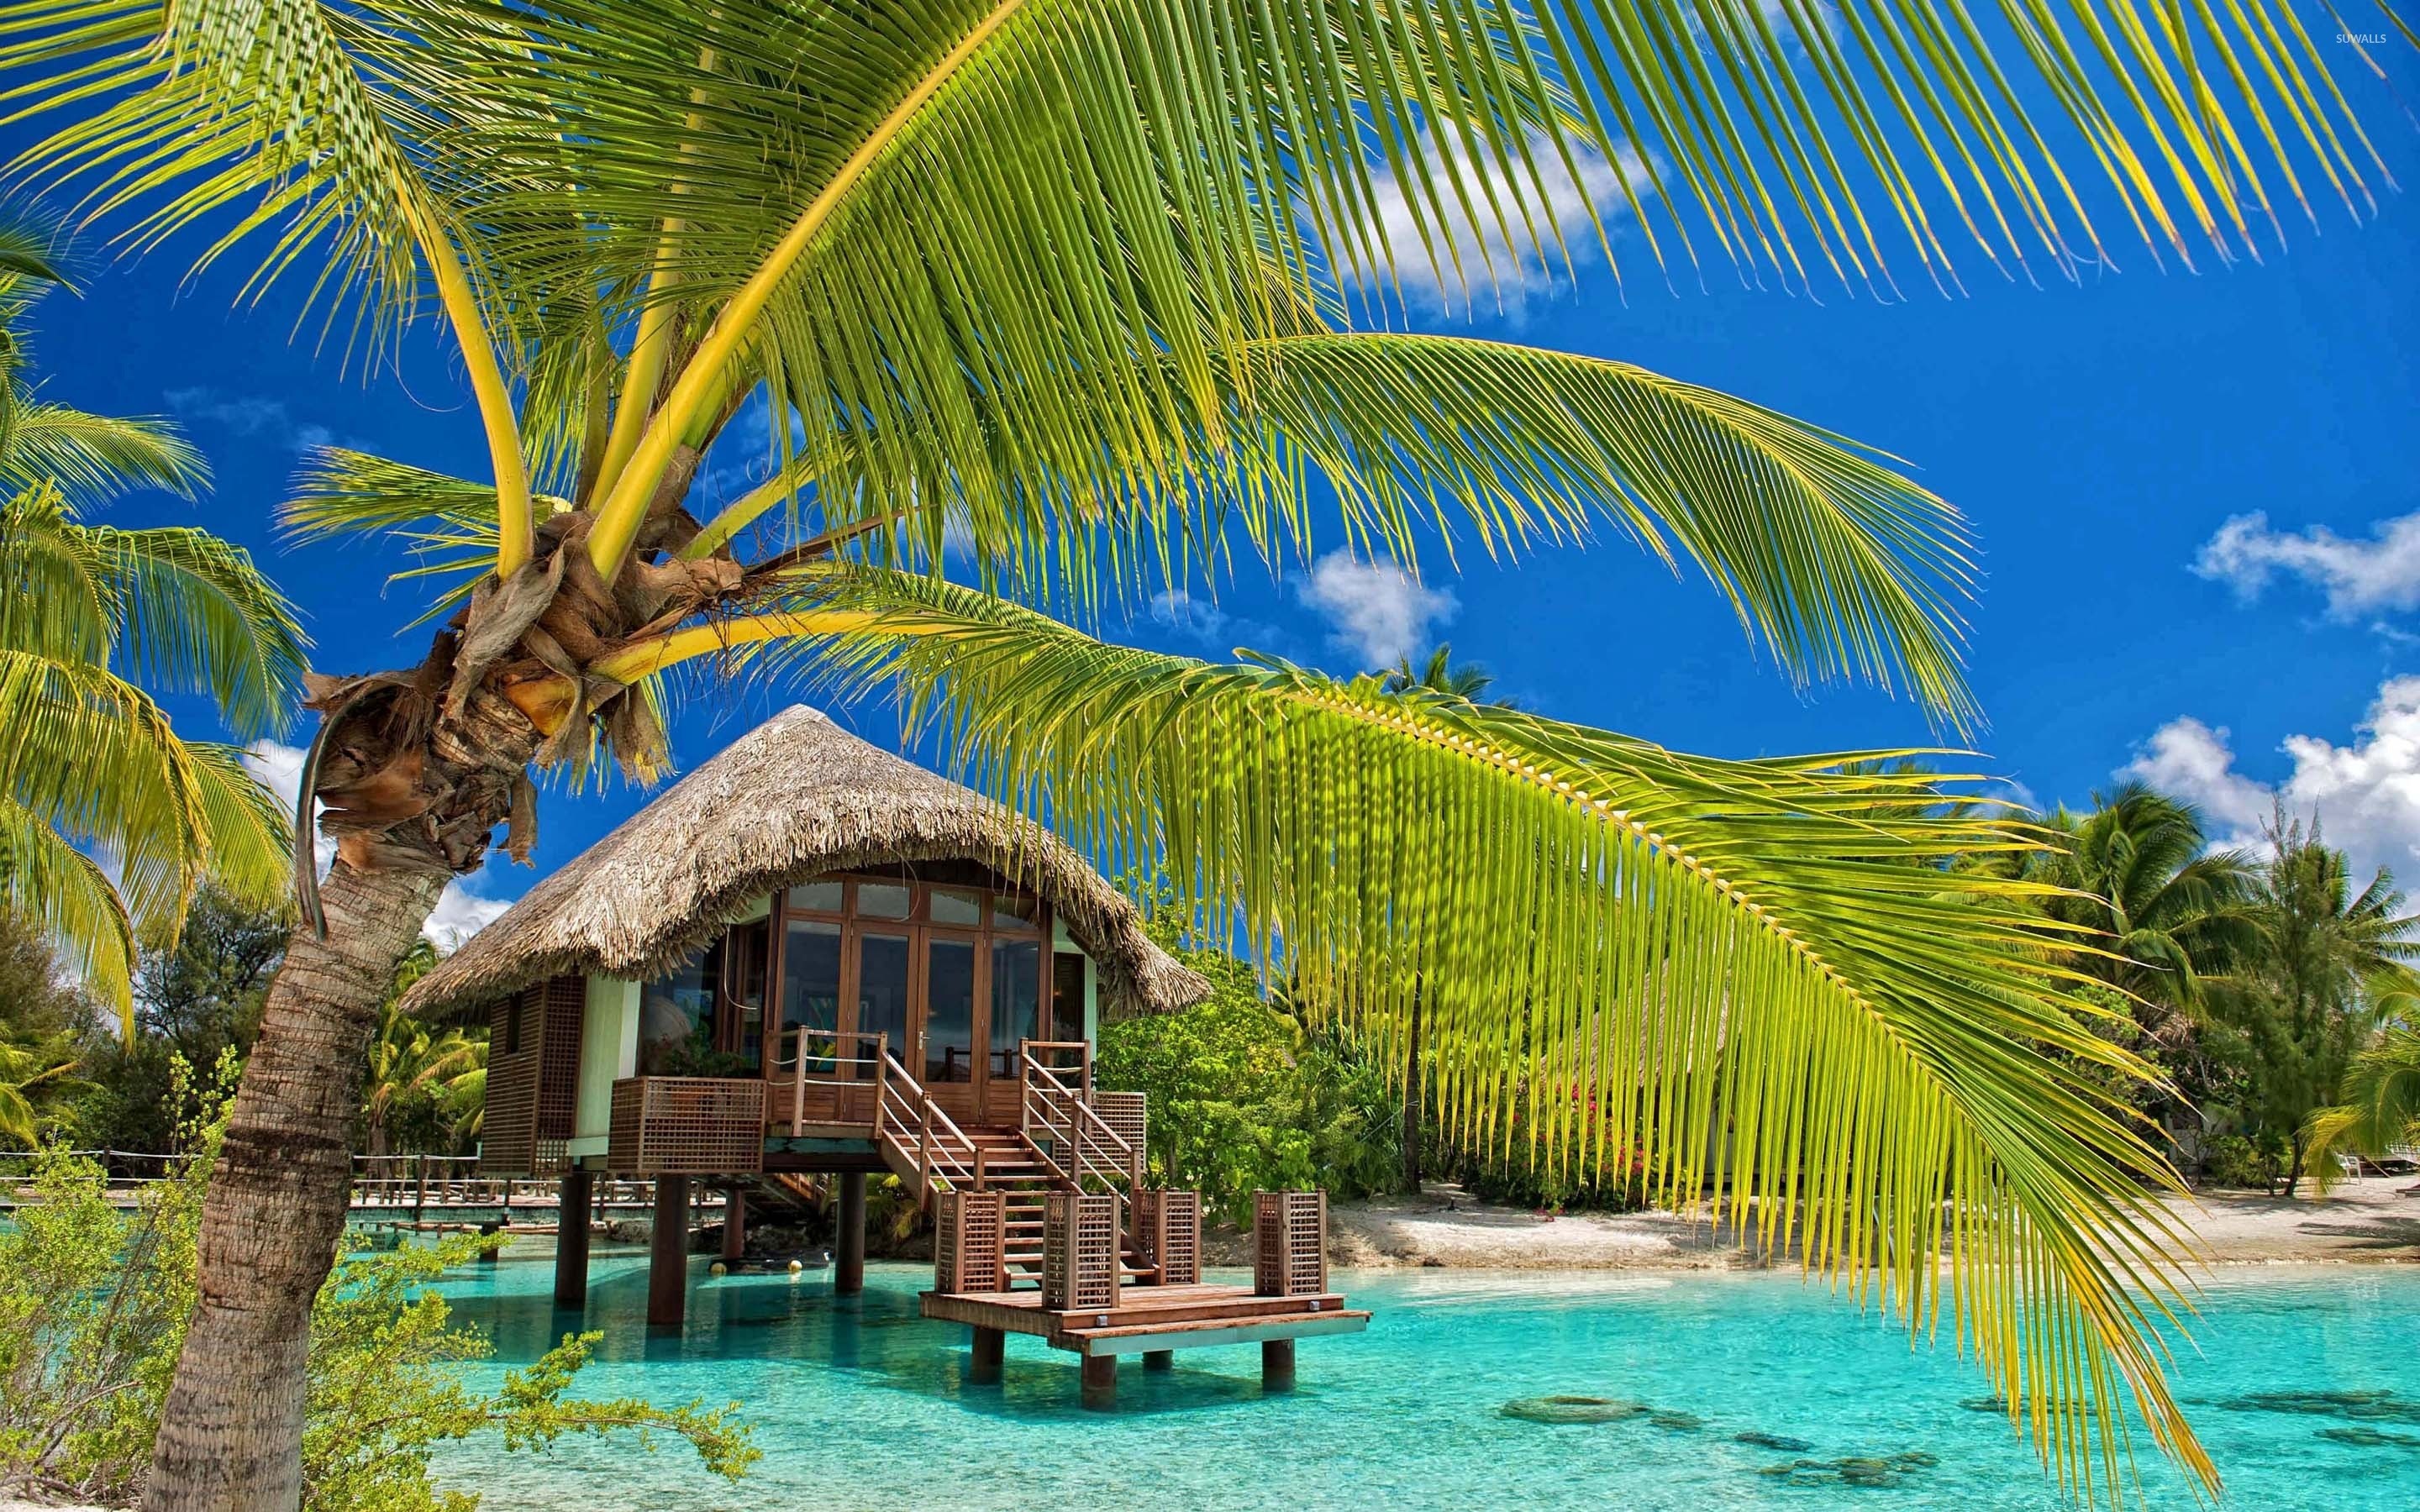 2880x1800 Hut in the water by the palm trees wallpaper